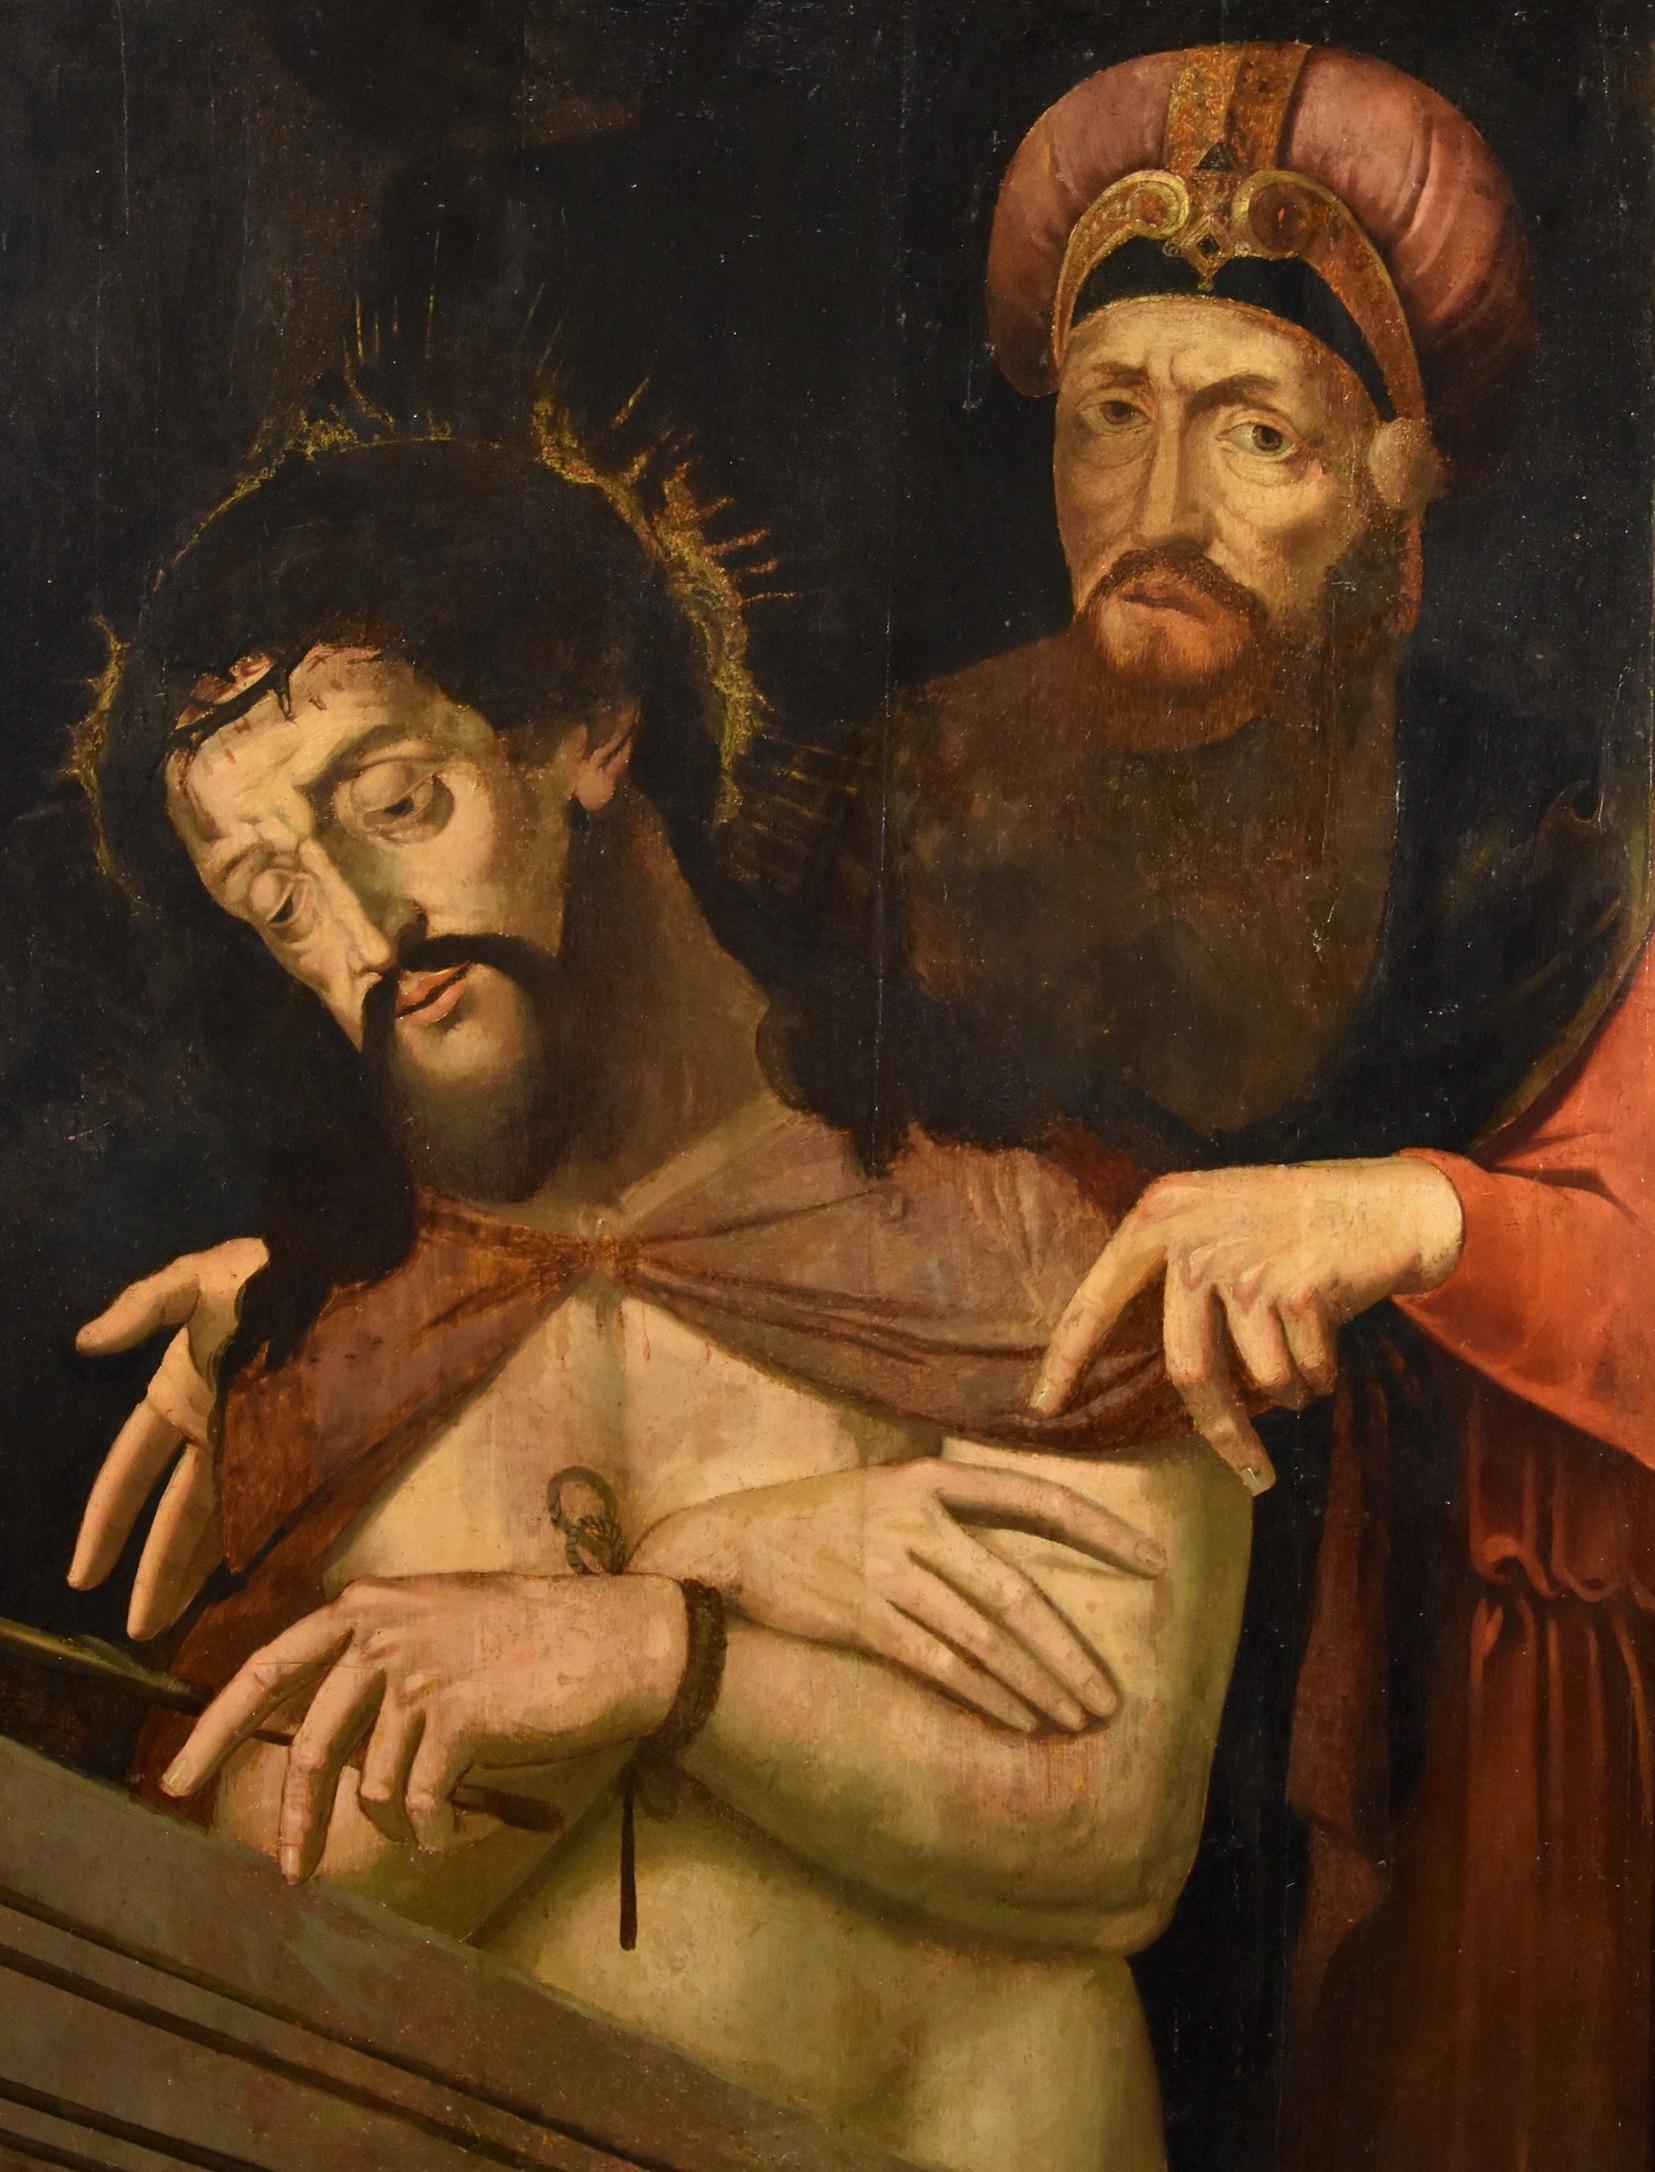 Circle of Michael Coxie (Malines, 1499 - Malines, 1592)
Ecce Homo with Pontius Pilate

Oil on panel
Flemish school 16th-17th century
112 x 81 cm - framed 121 x 90 cm.

The proposed painting is the work of a Flemish painter active between the 16th